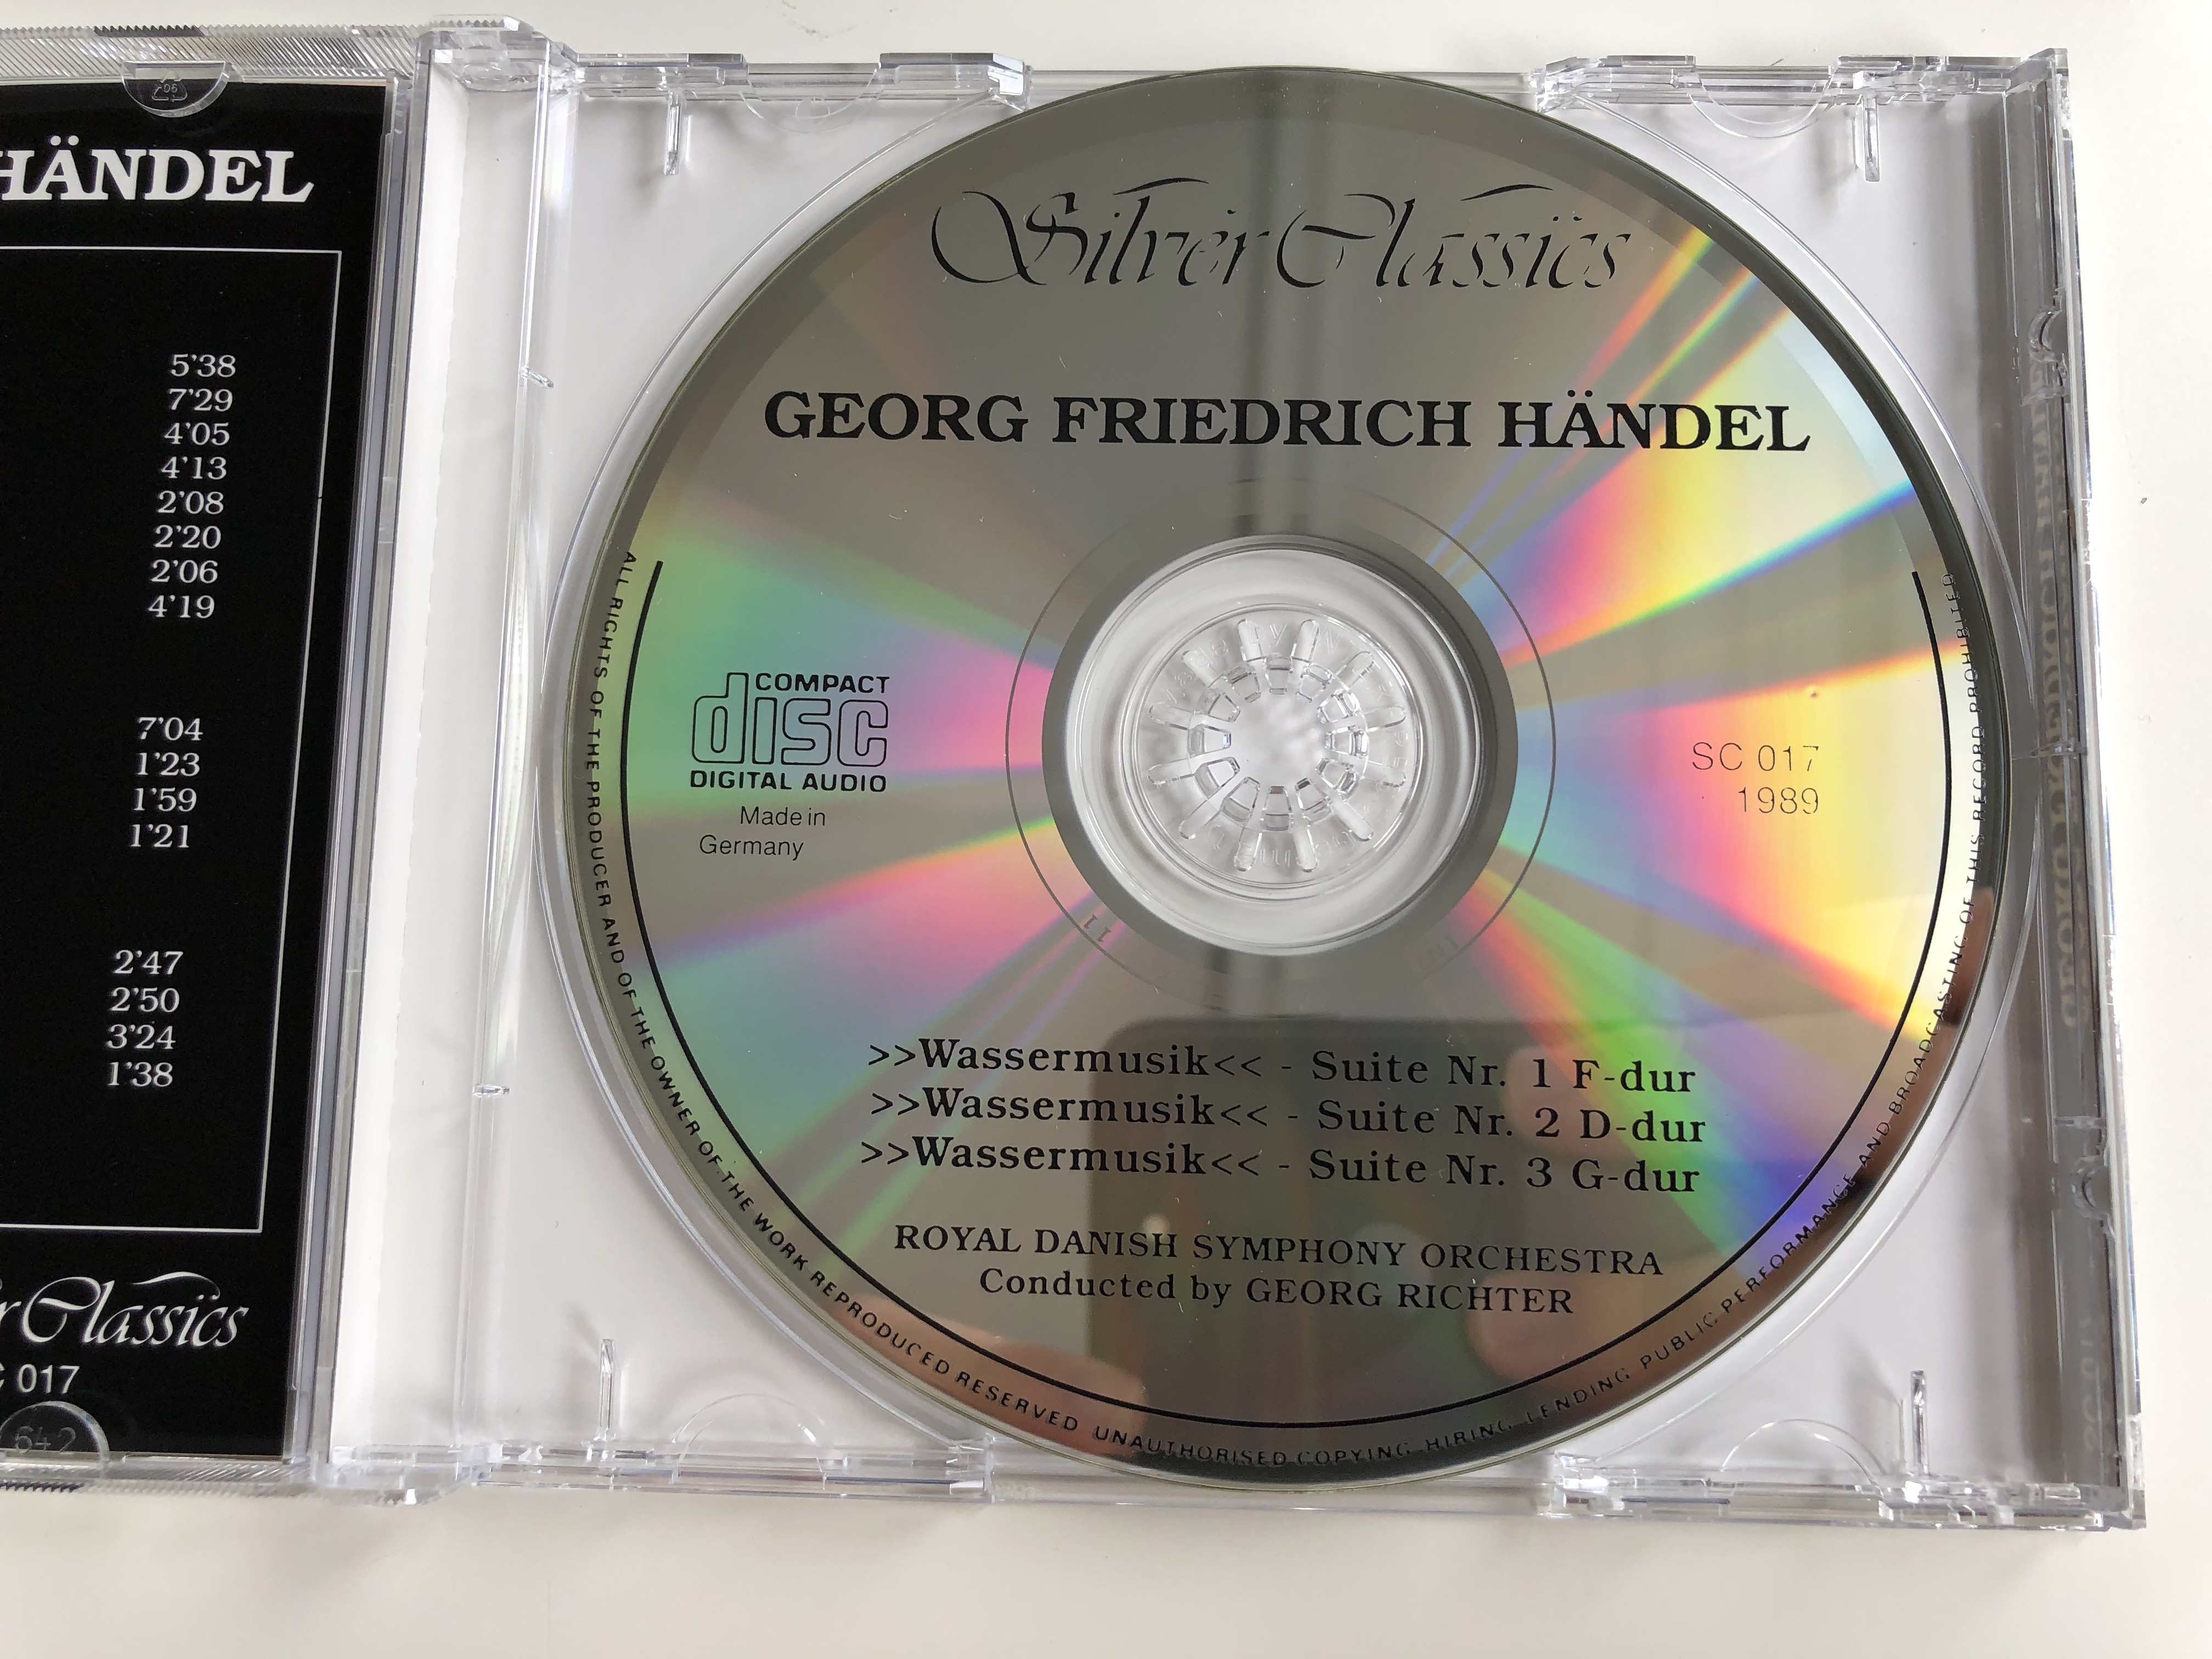 georg-friedrich-handel-wassermusik-suite-nr.-1-3-royal-danish-symphony-orchestra-conducted-by-georg-richter-silver-classics-audio-cd-1989-sc-017-3-.jpg